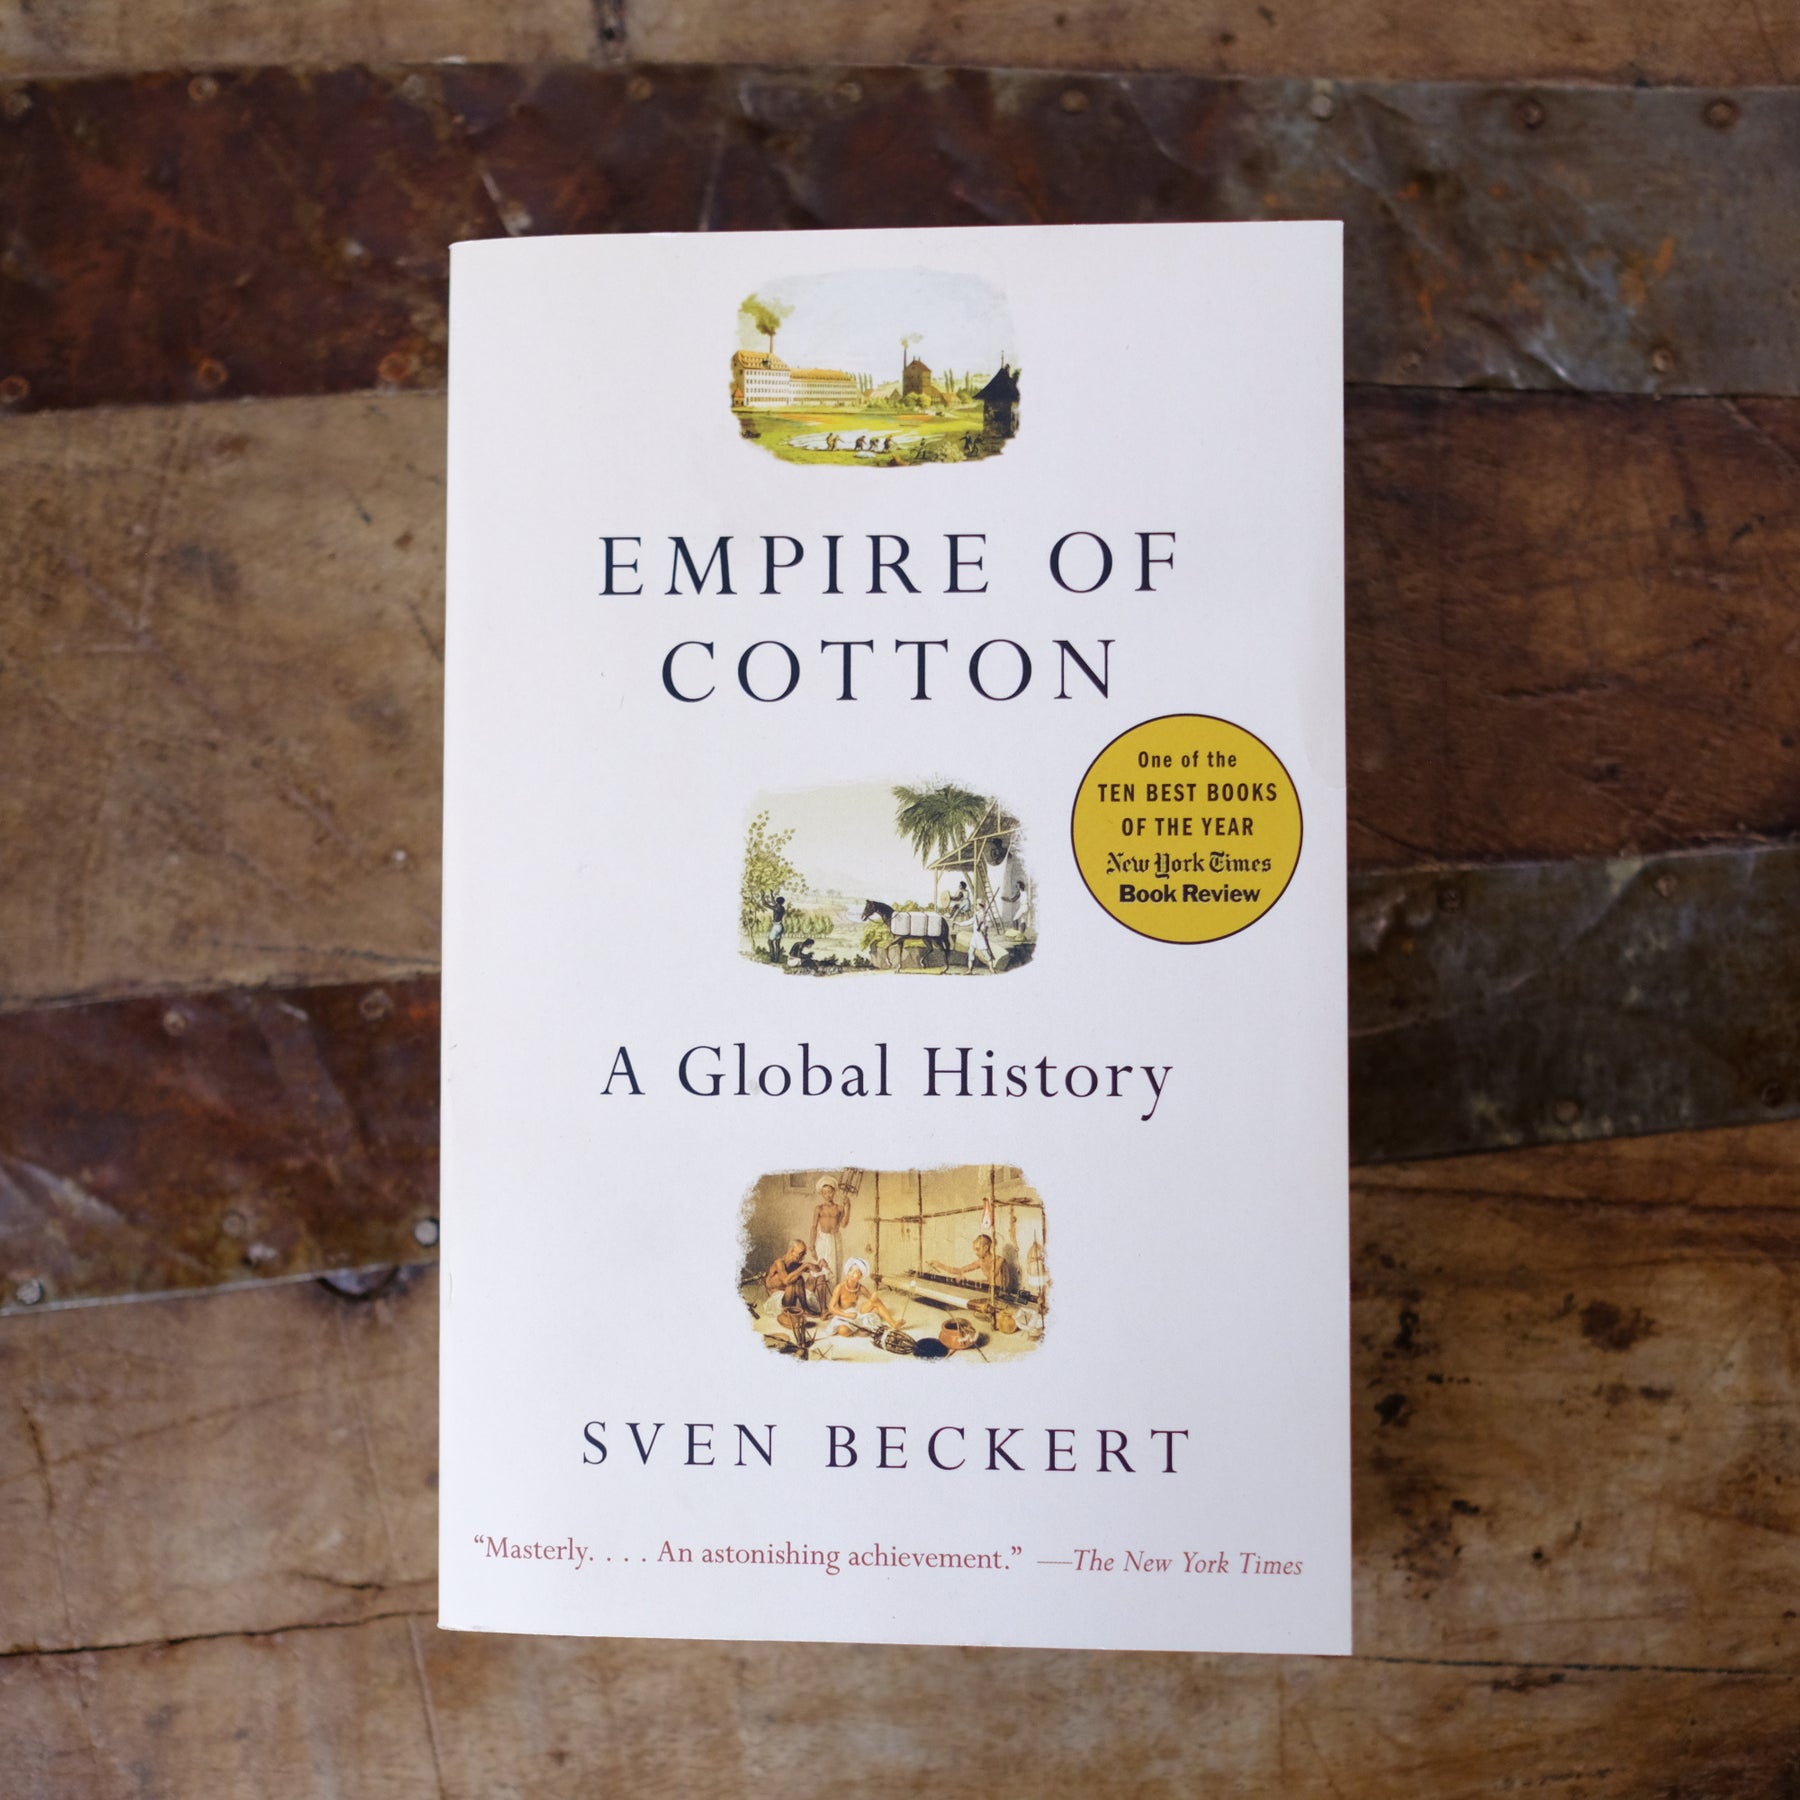  Empire: A New History of the World: The Rise and Fall